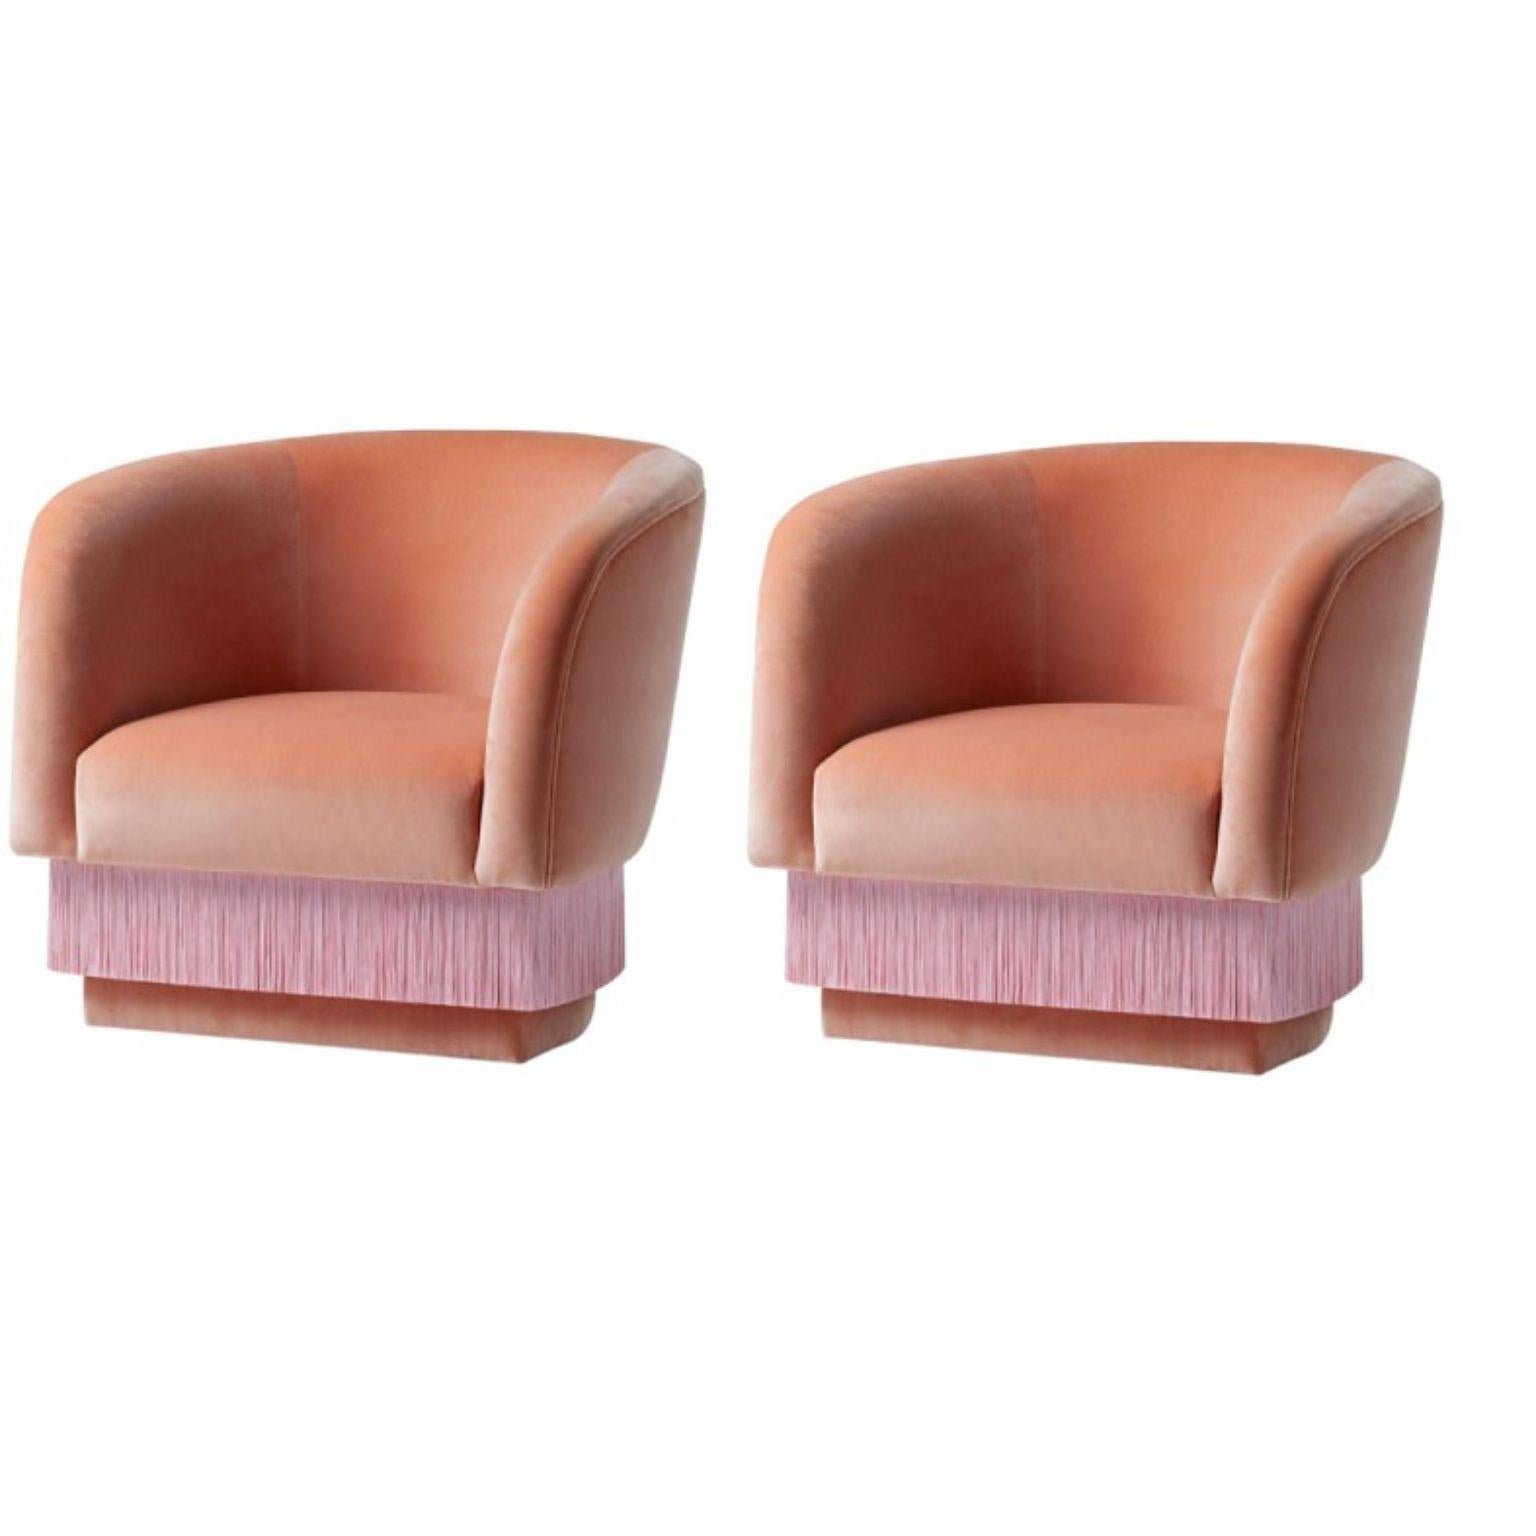 Set of 2 Folie armchairs by Dooq
Measures: W 82 cm, 32”
D 70 cm, 28”
H 75 cm, 30”
Seat height 42 cm, 17”

Materials: Upholstery and piping fabric or leather, fringes.

Dooq is a design company dedicated to celebrate the luxury of living.